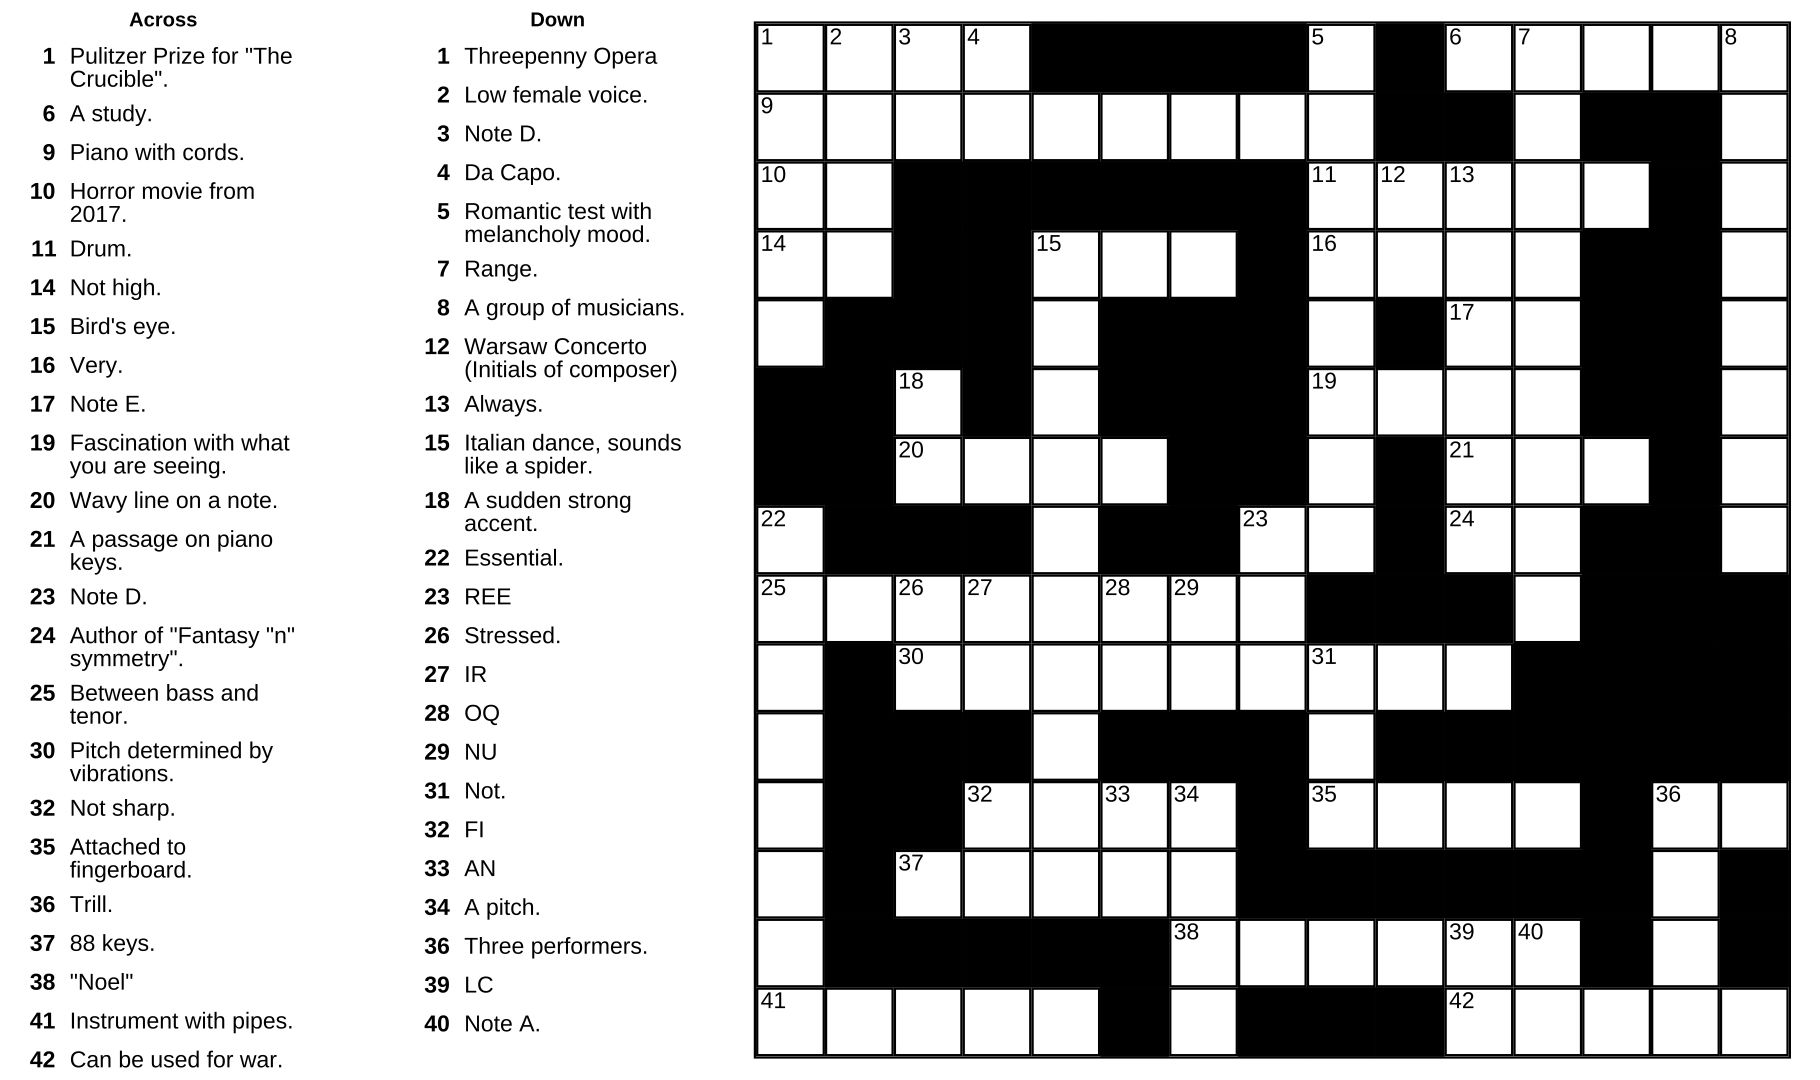 Free Printable Crossword Puzzles For Adults_51710